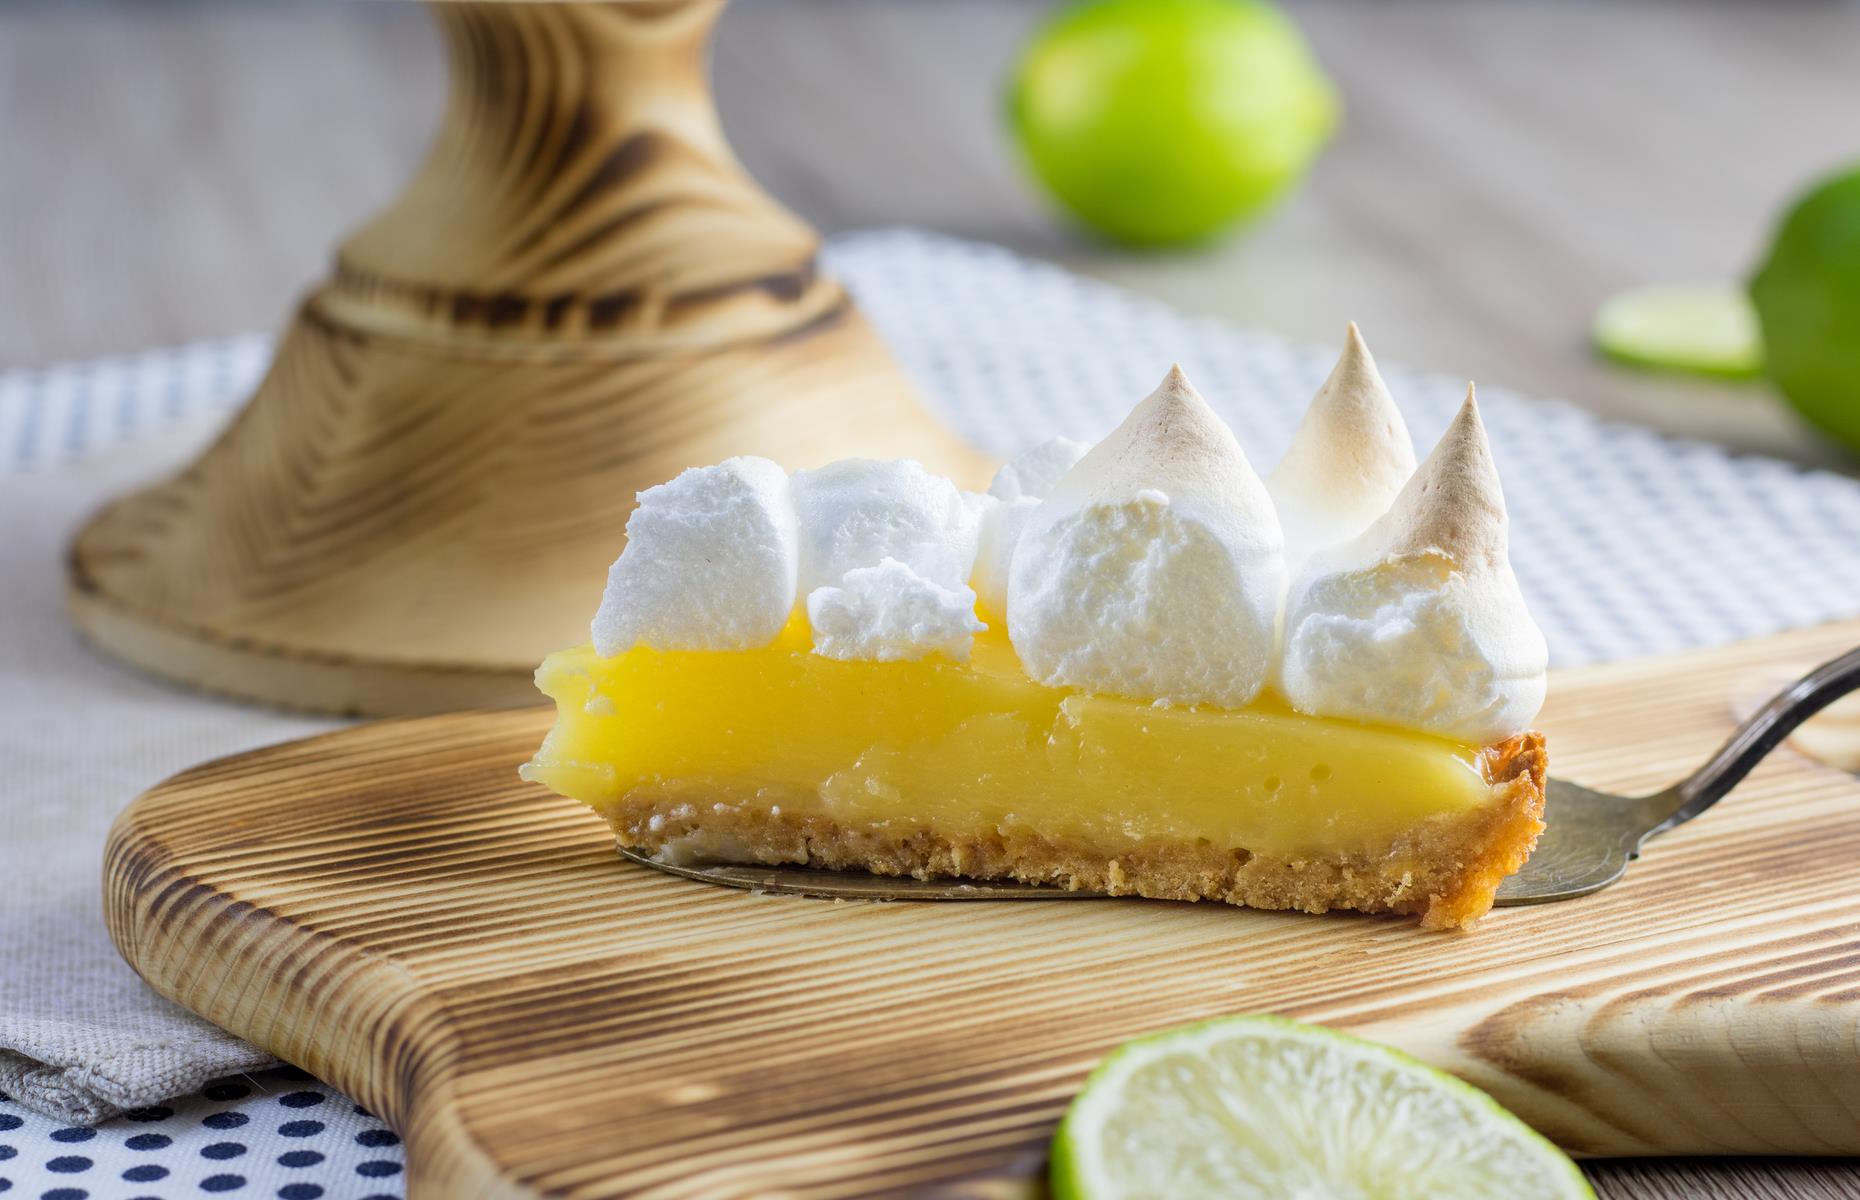 <p>Few foods are so intertwined with the identity of a place than key lime pie. The classic dessert is particularly ubiquitous throughout the Florida Keys archipelago. It’s a tangy treat, too, like a cheesecake made with a base of crushed-up crackers, with a cool, creamy condensed milk filling brightened by tart key limes and topped with meringue or whipped cream. Yet its origins have been called into question.</p>